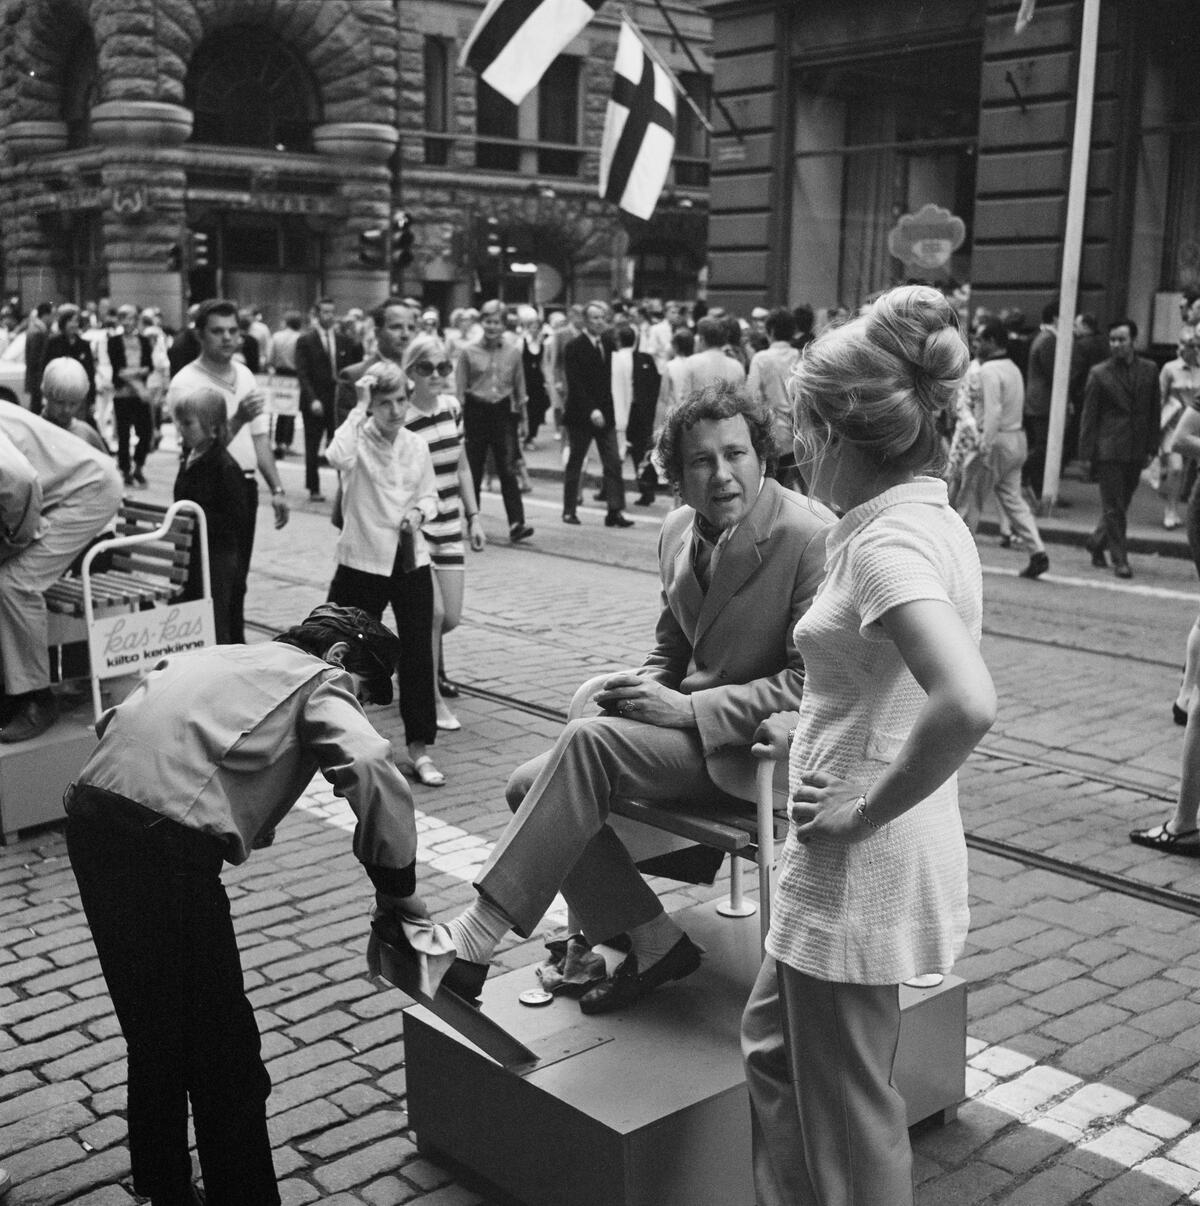 The programme of Helsinki Day has included events that were ahead of their time. Photo from the opening of Aleksanterinkatu as a pedestrian street on 12 June 1970. Aleksanterinkatu was a pedestrian street from 12 June 1970 to 8 January 1971. Photo: Helsinki City Museum